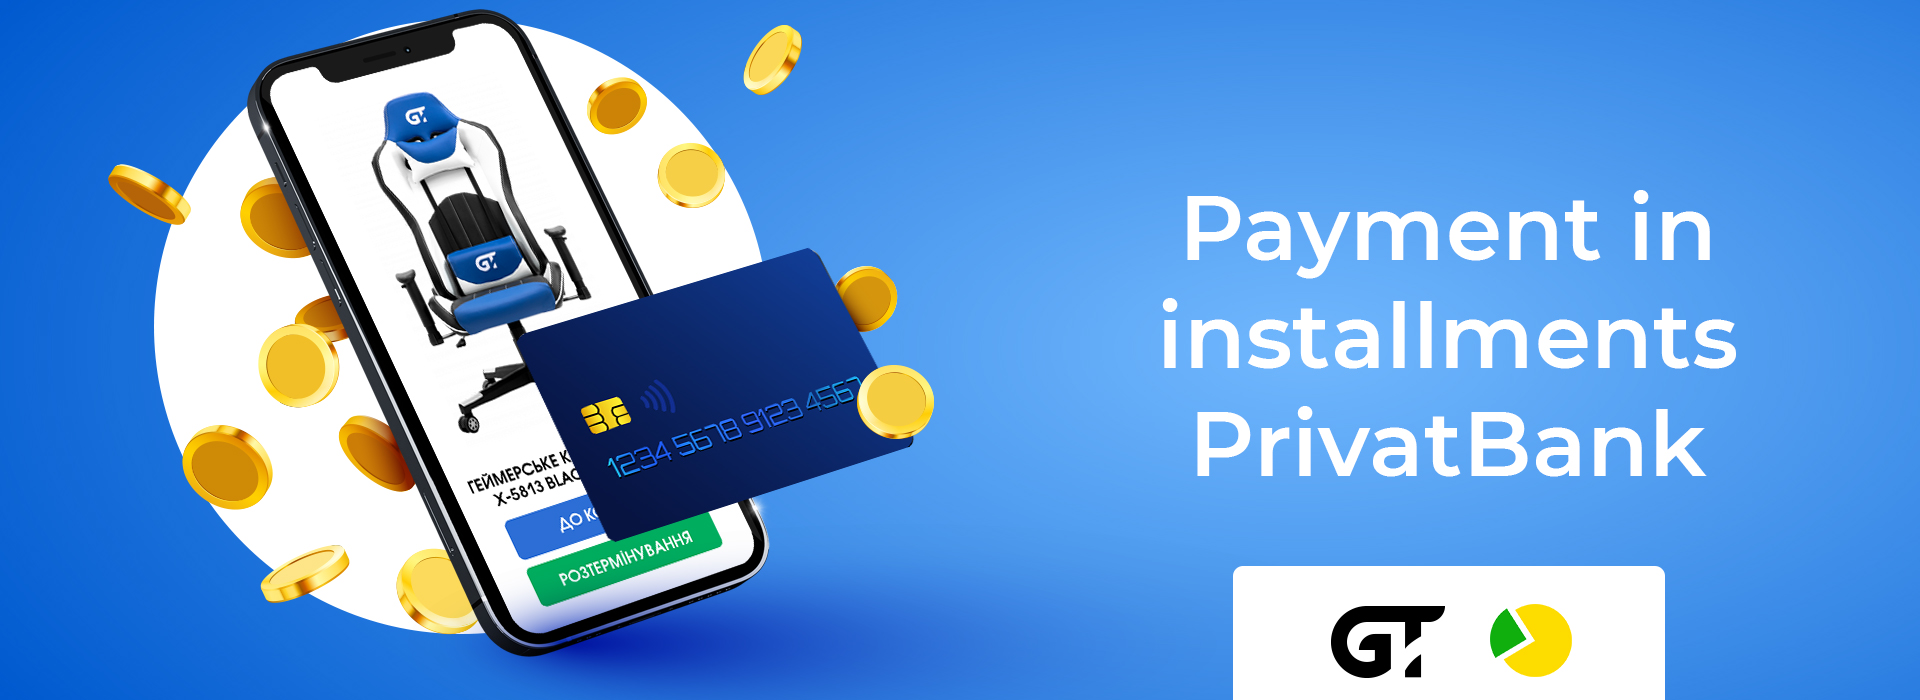 Payment in installments from PrivatBank